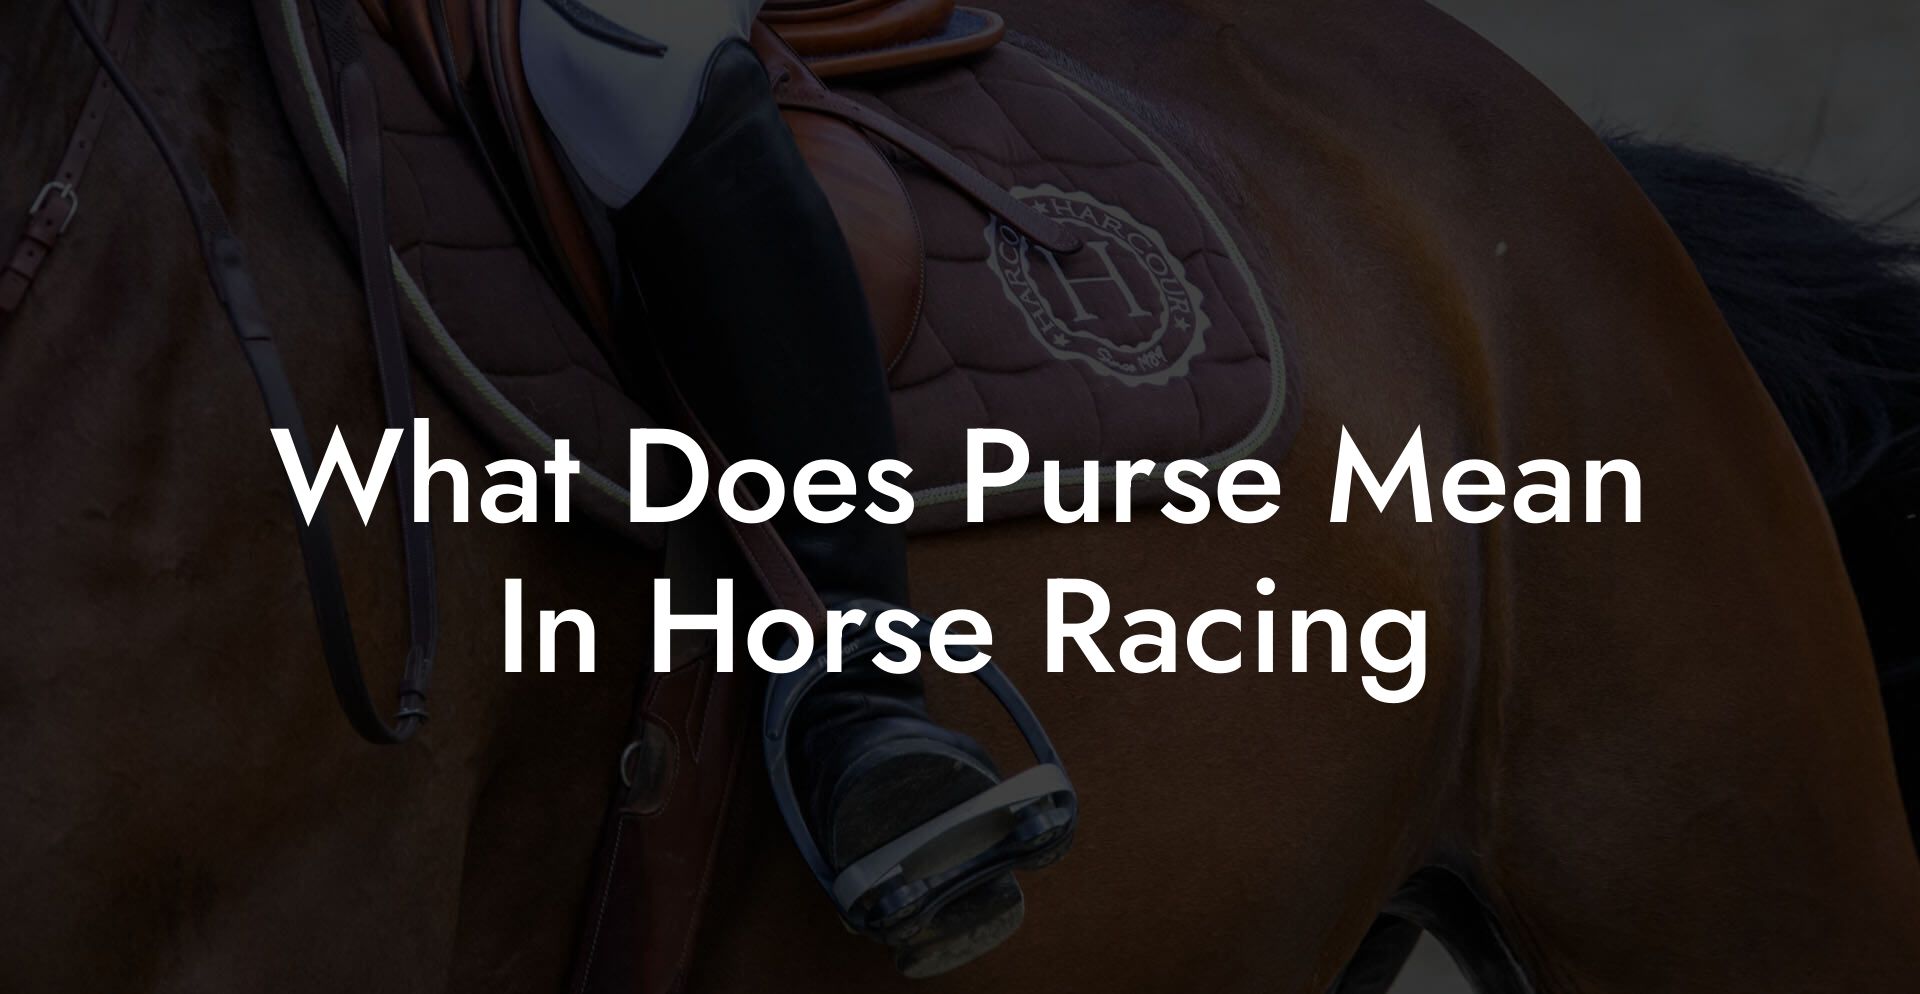 What Does Purse Mean In Horse Racing